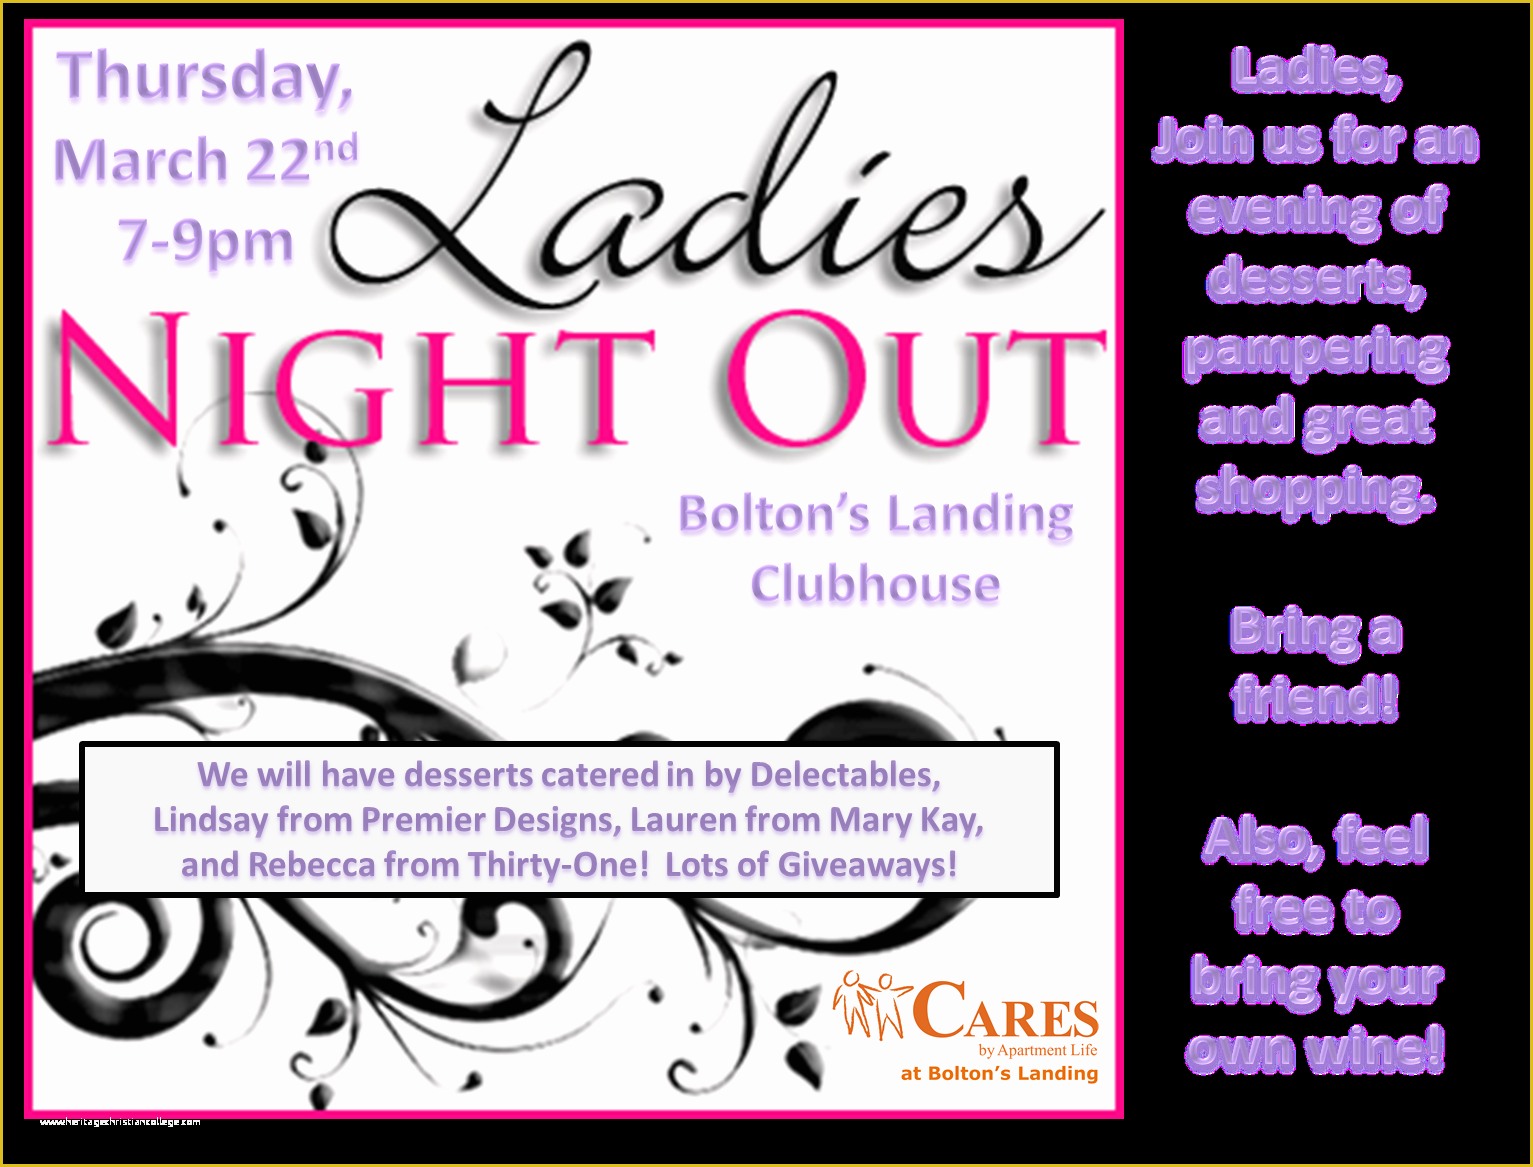 Ladies Night Out Flyer Template Free Of Bolton S Landing Cares